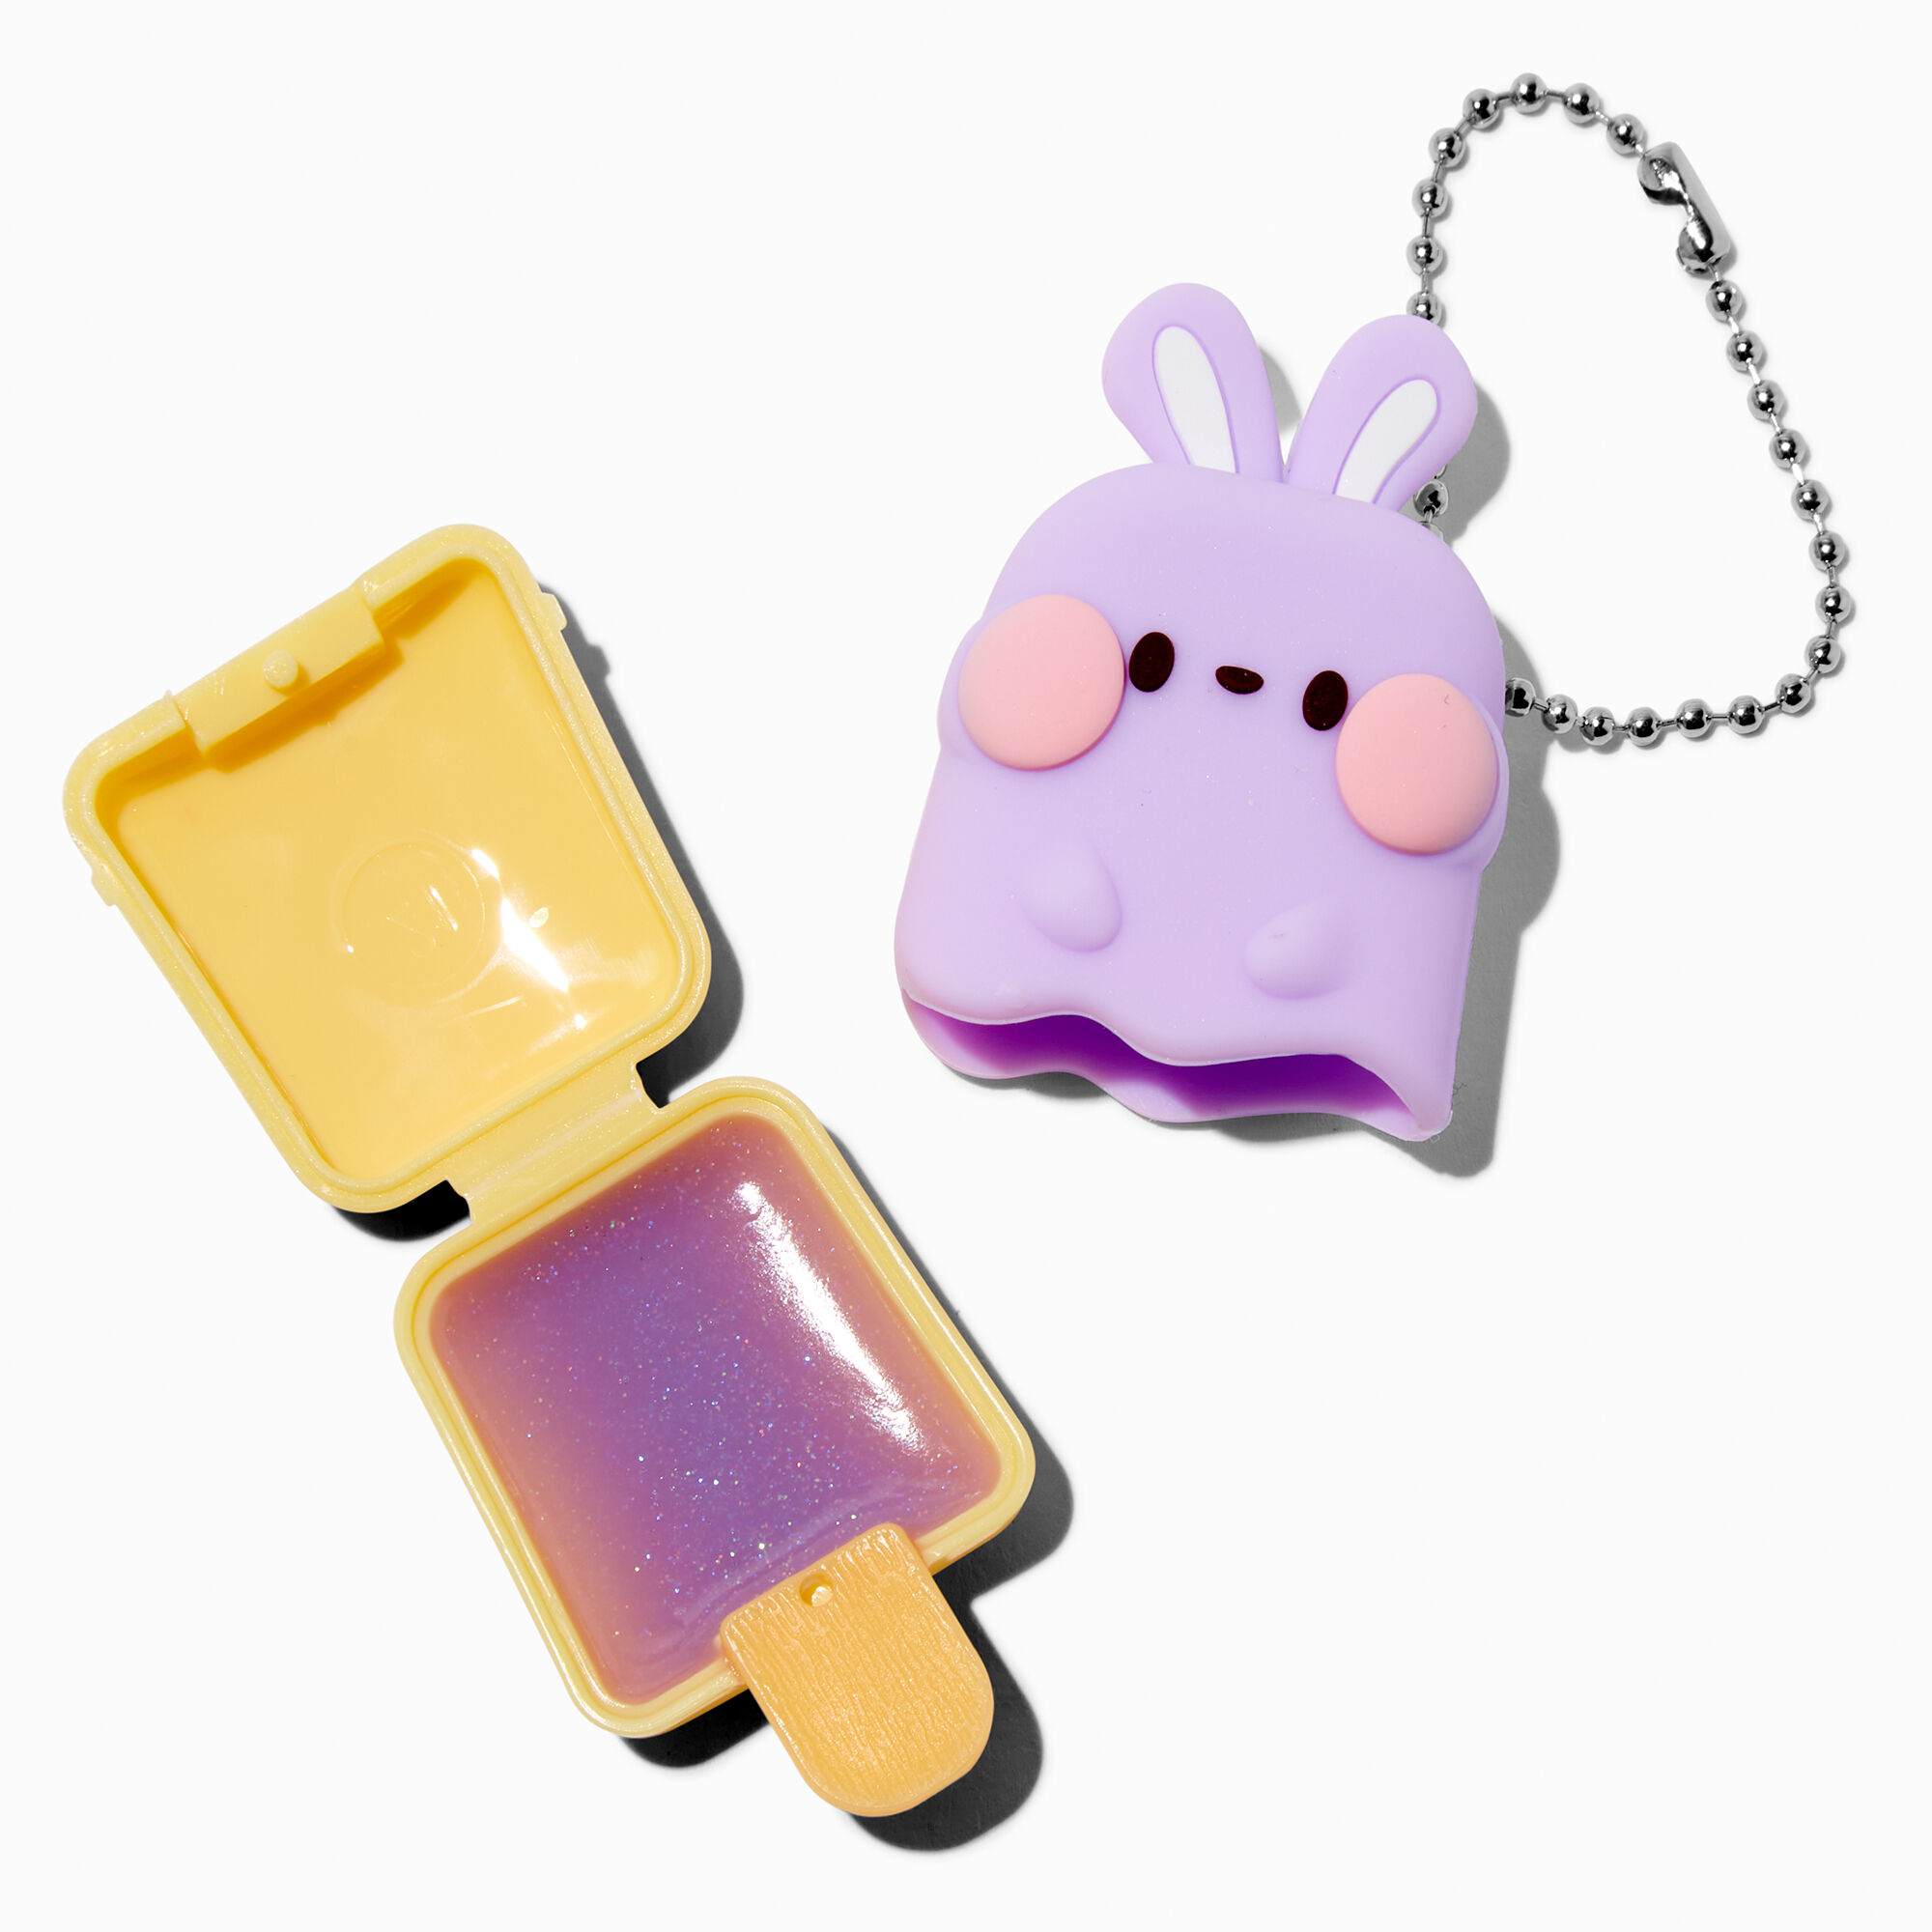 View Claires Pucker Pops Bunny Lip Gloss Cotton Candy Purple information